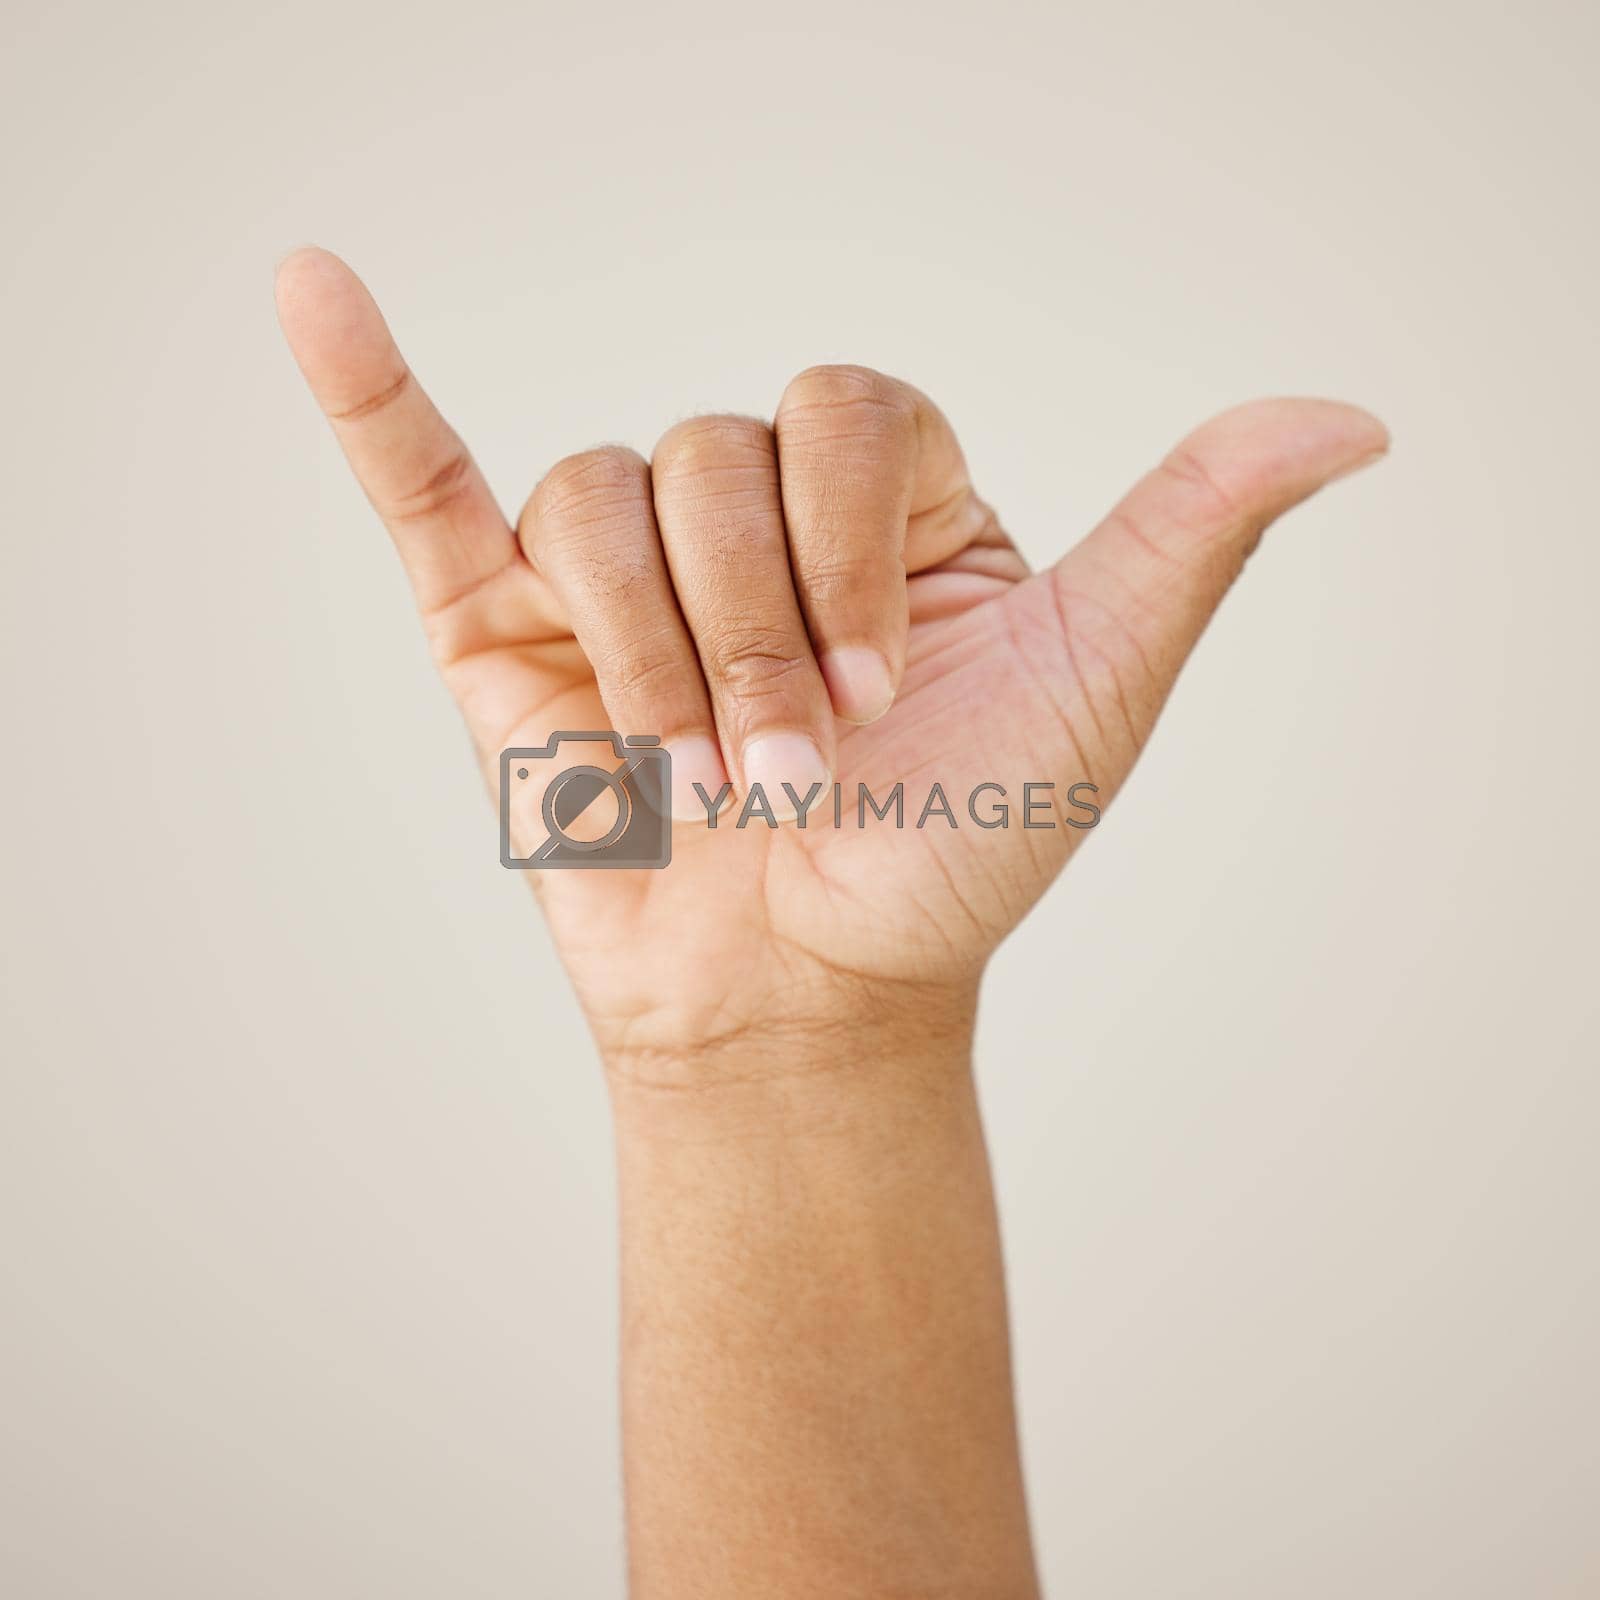 Royalty free image of Hit me up. a man showing a hand sign against a studio background. by YuriArcurs